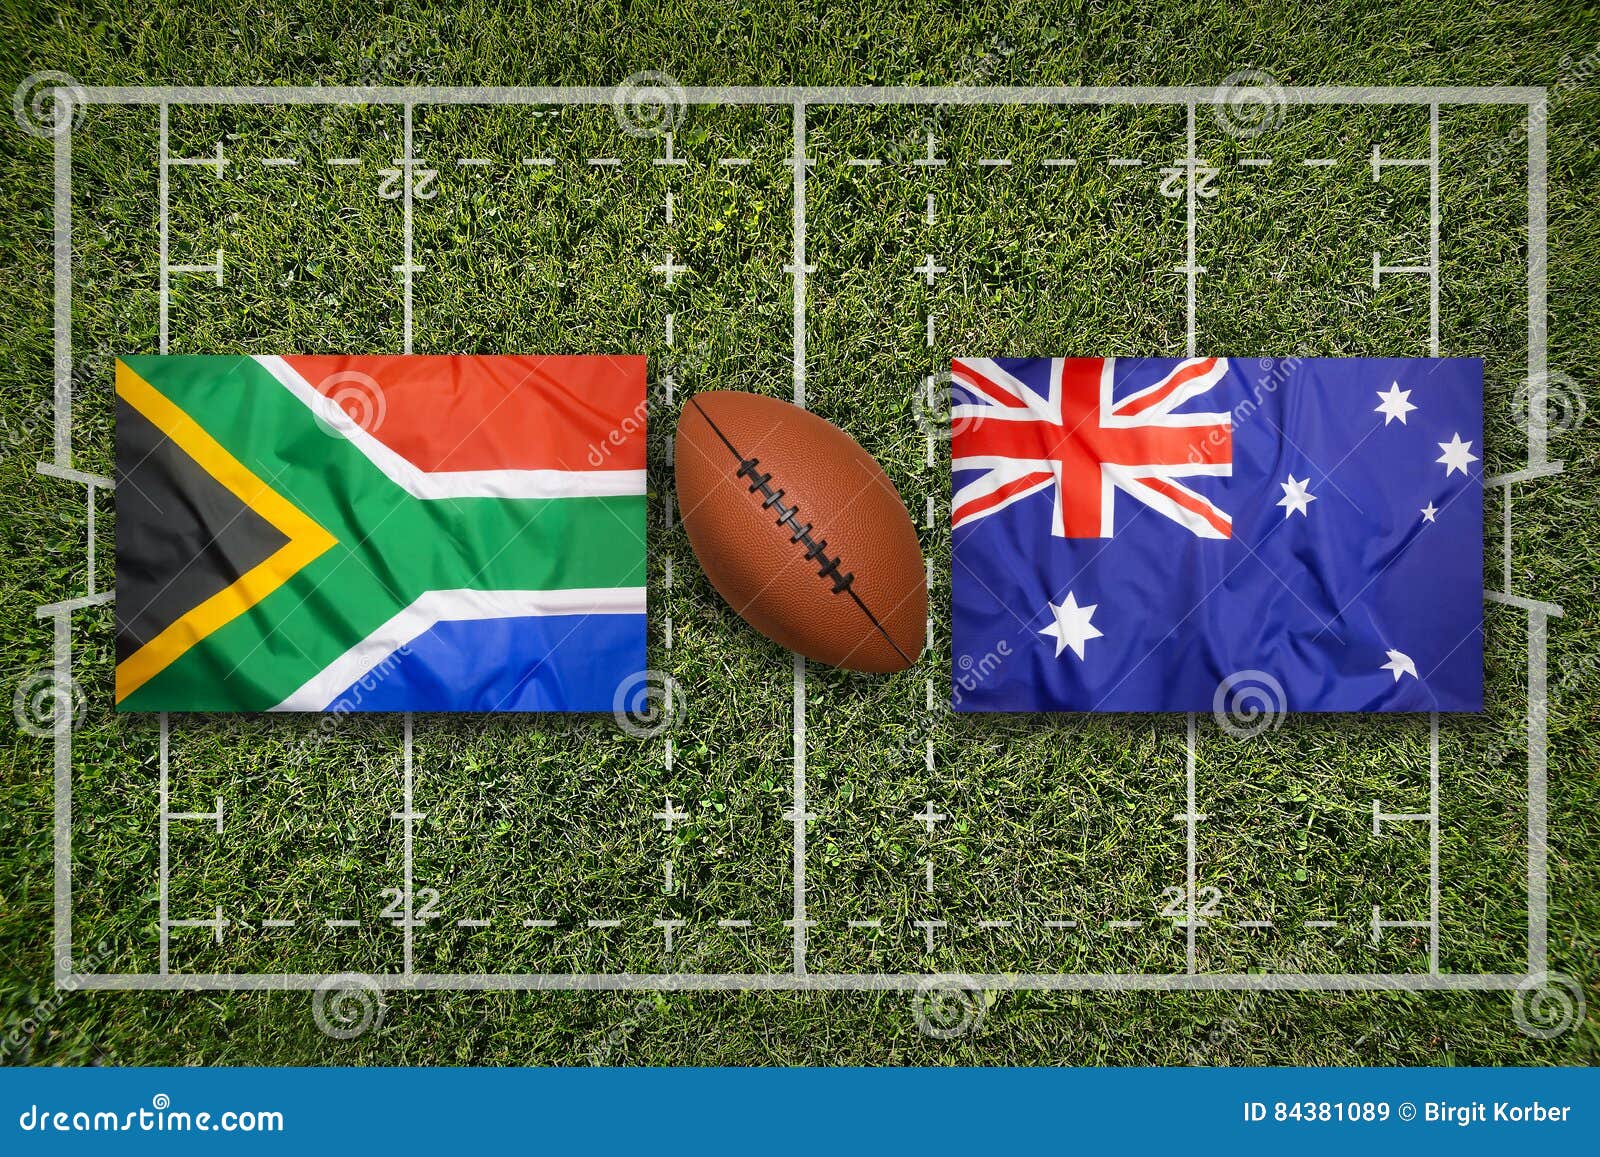 South Africa Vs